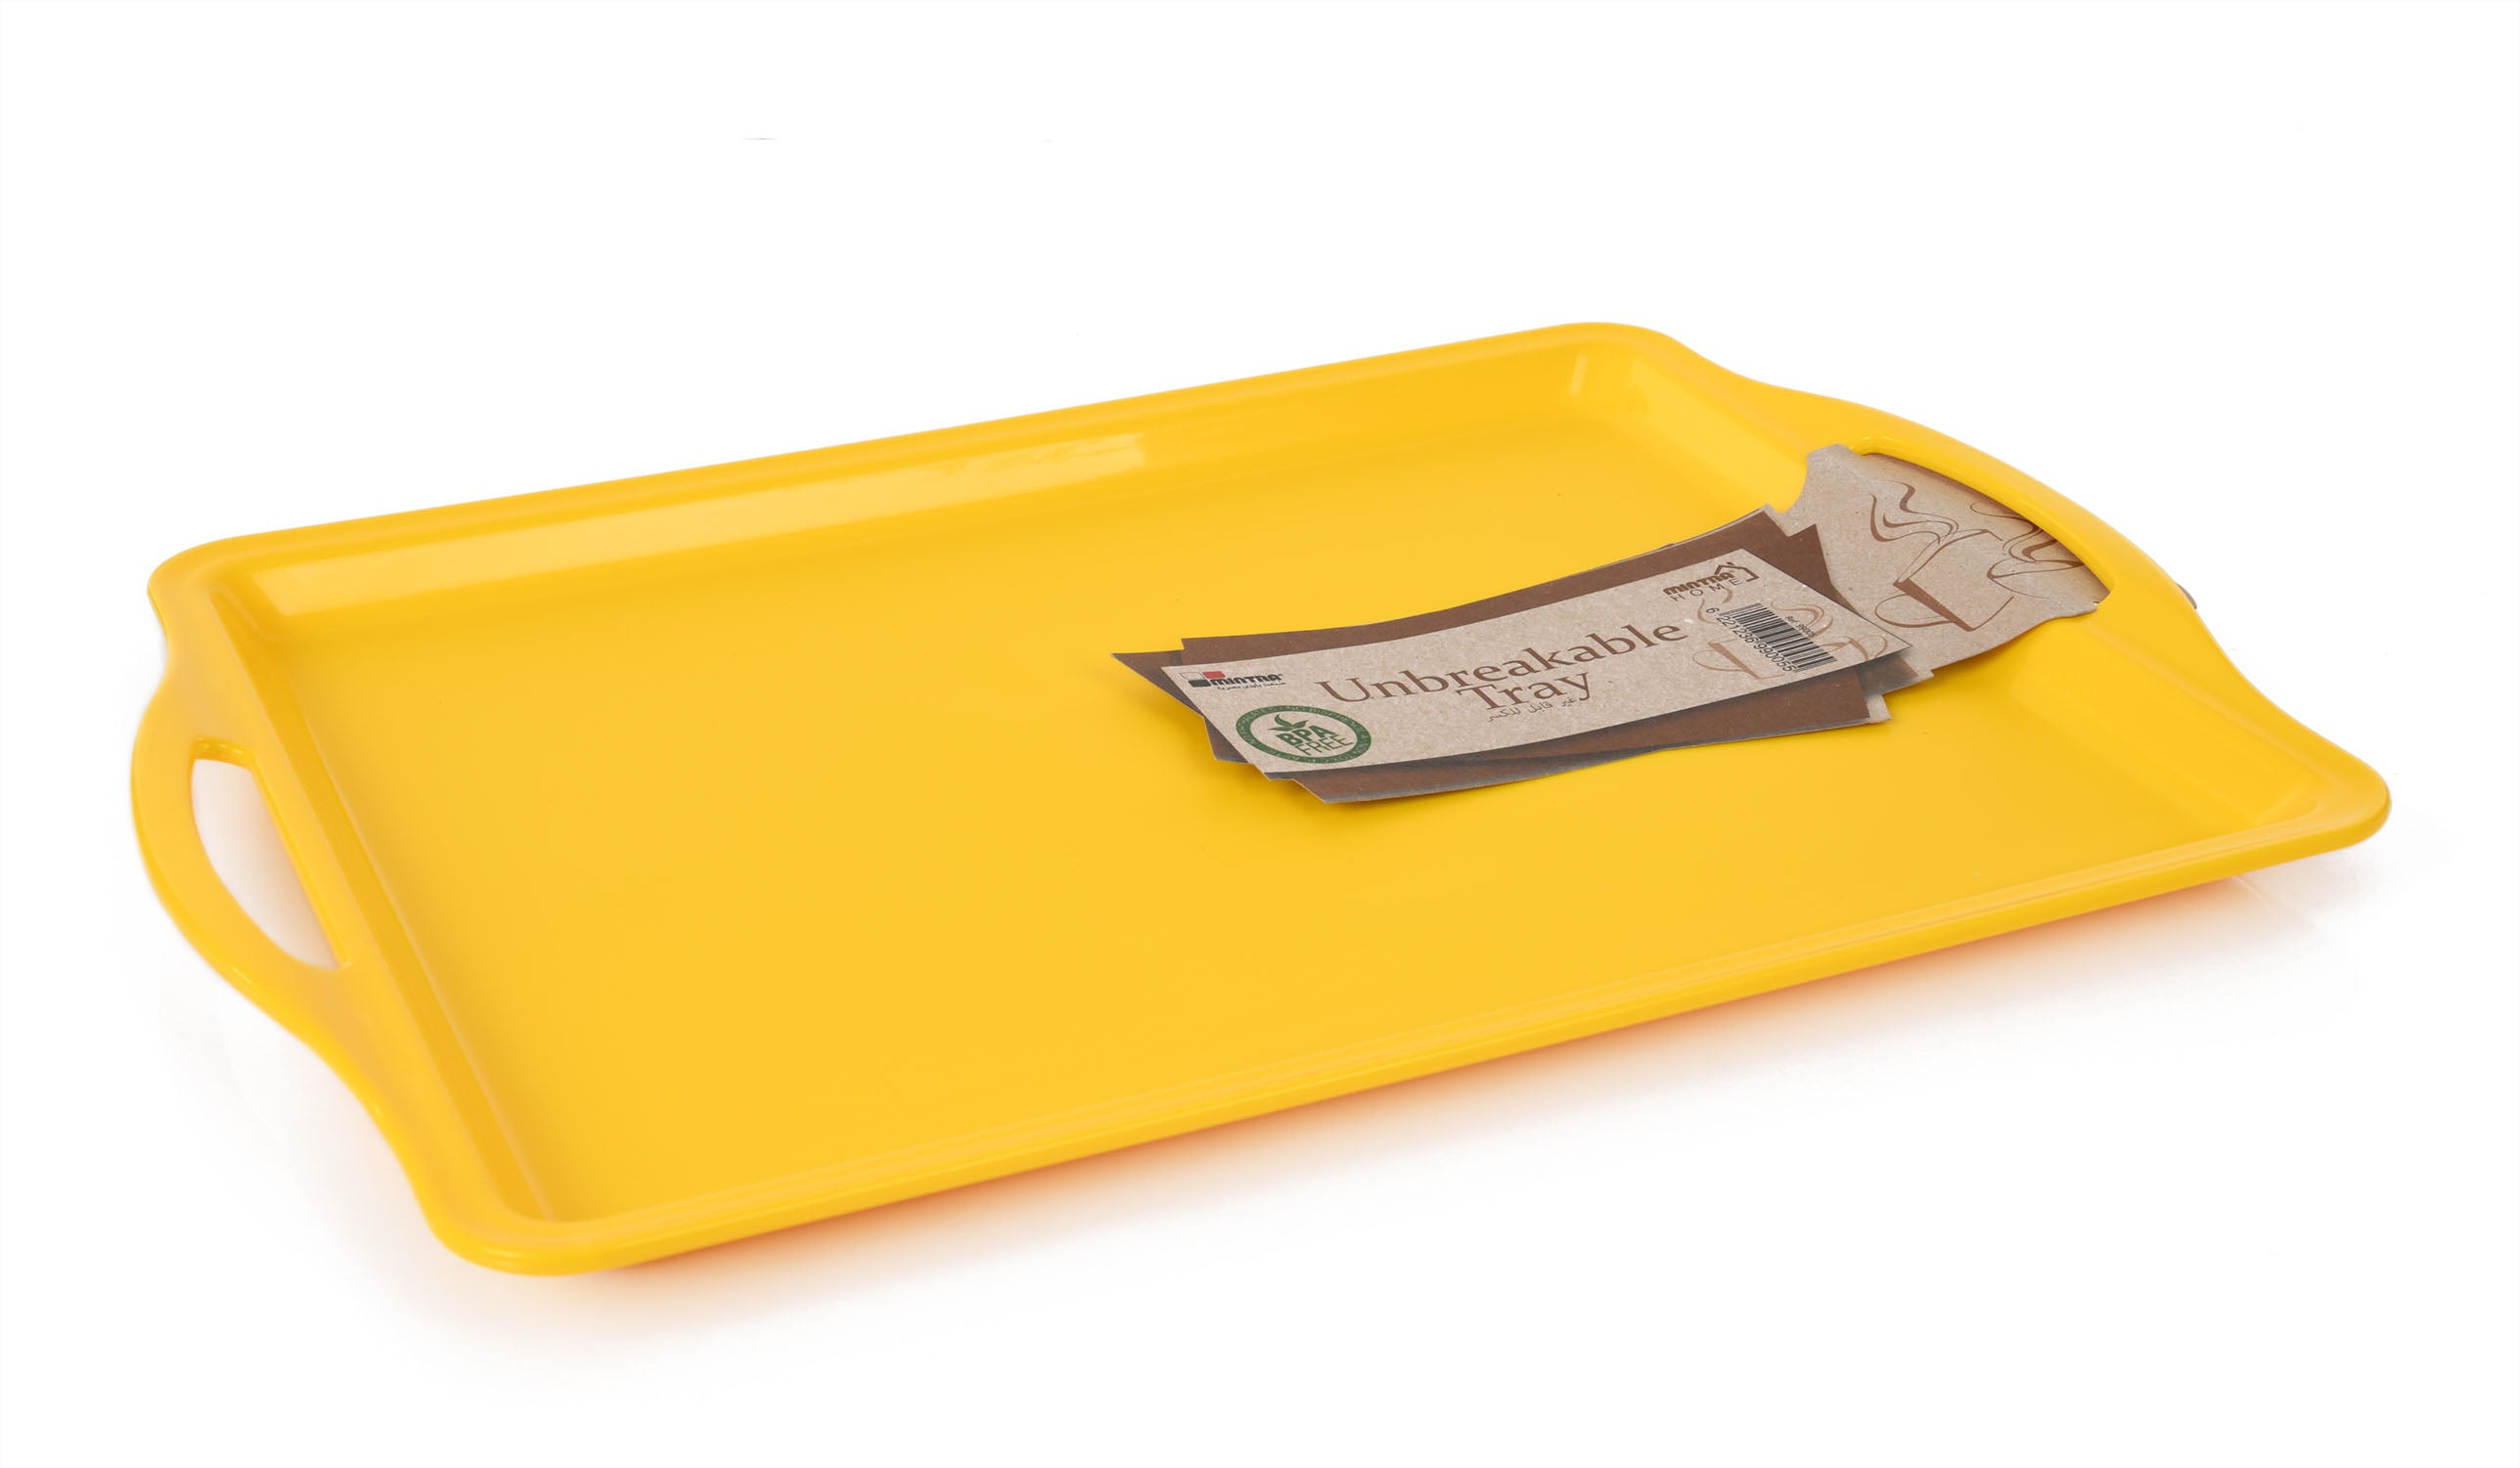 Unbreakable Durable Serving Tray - 1 Pack, Yellow